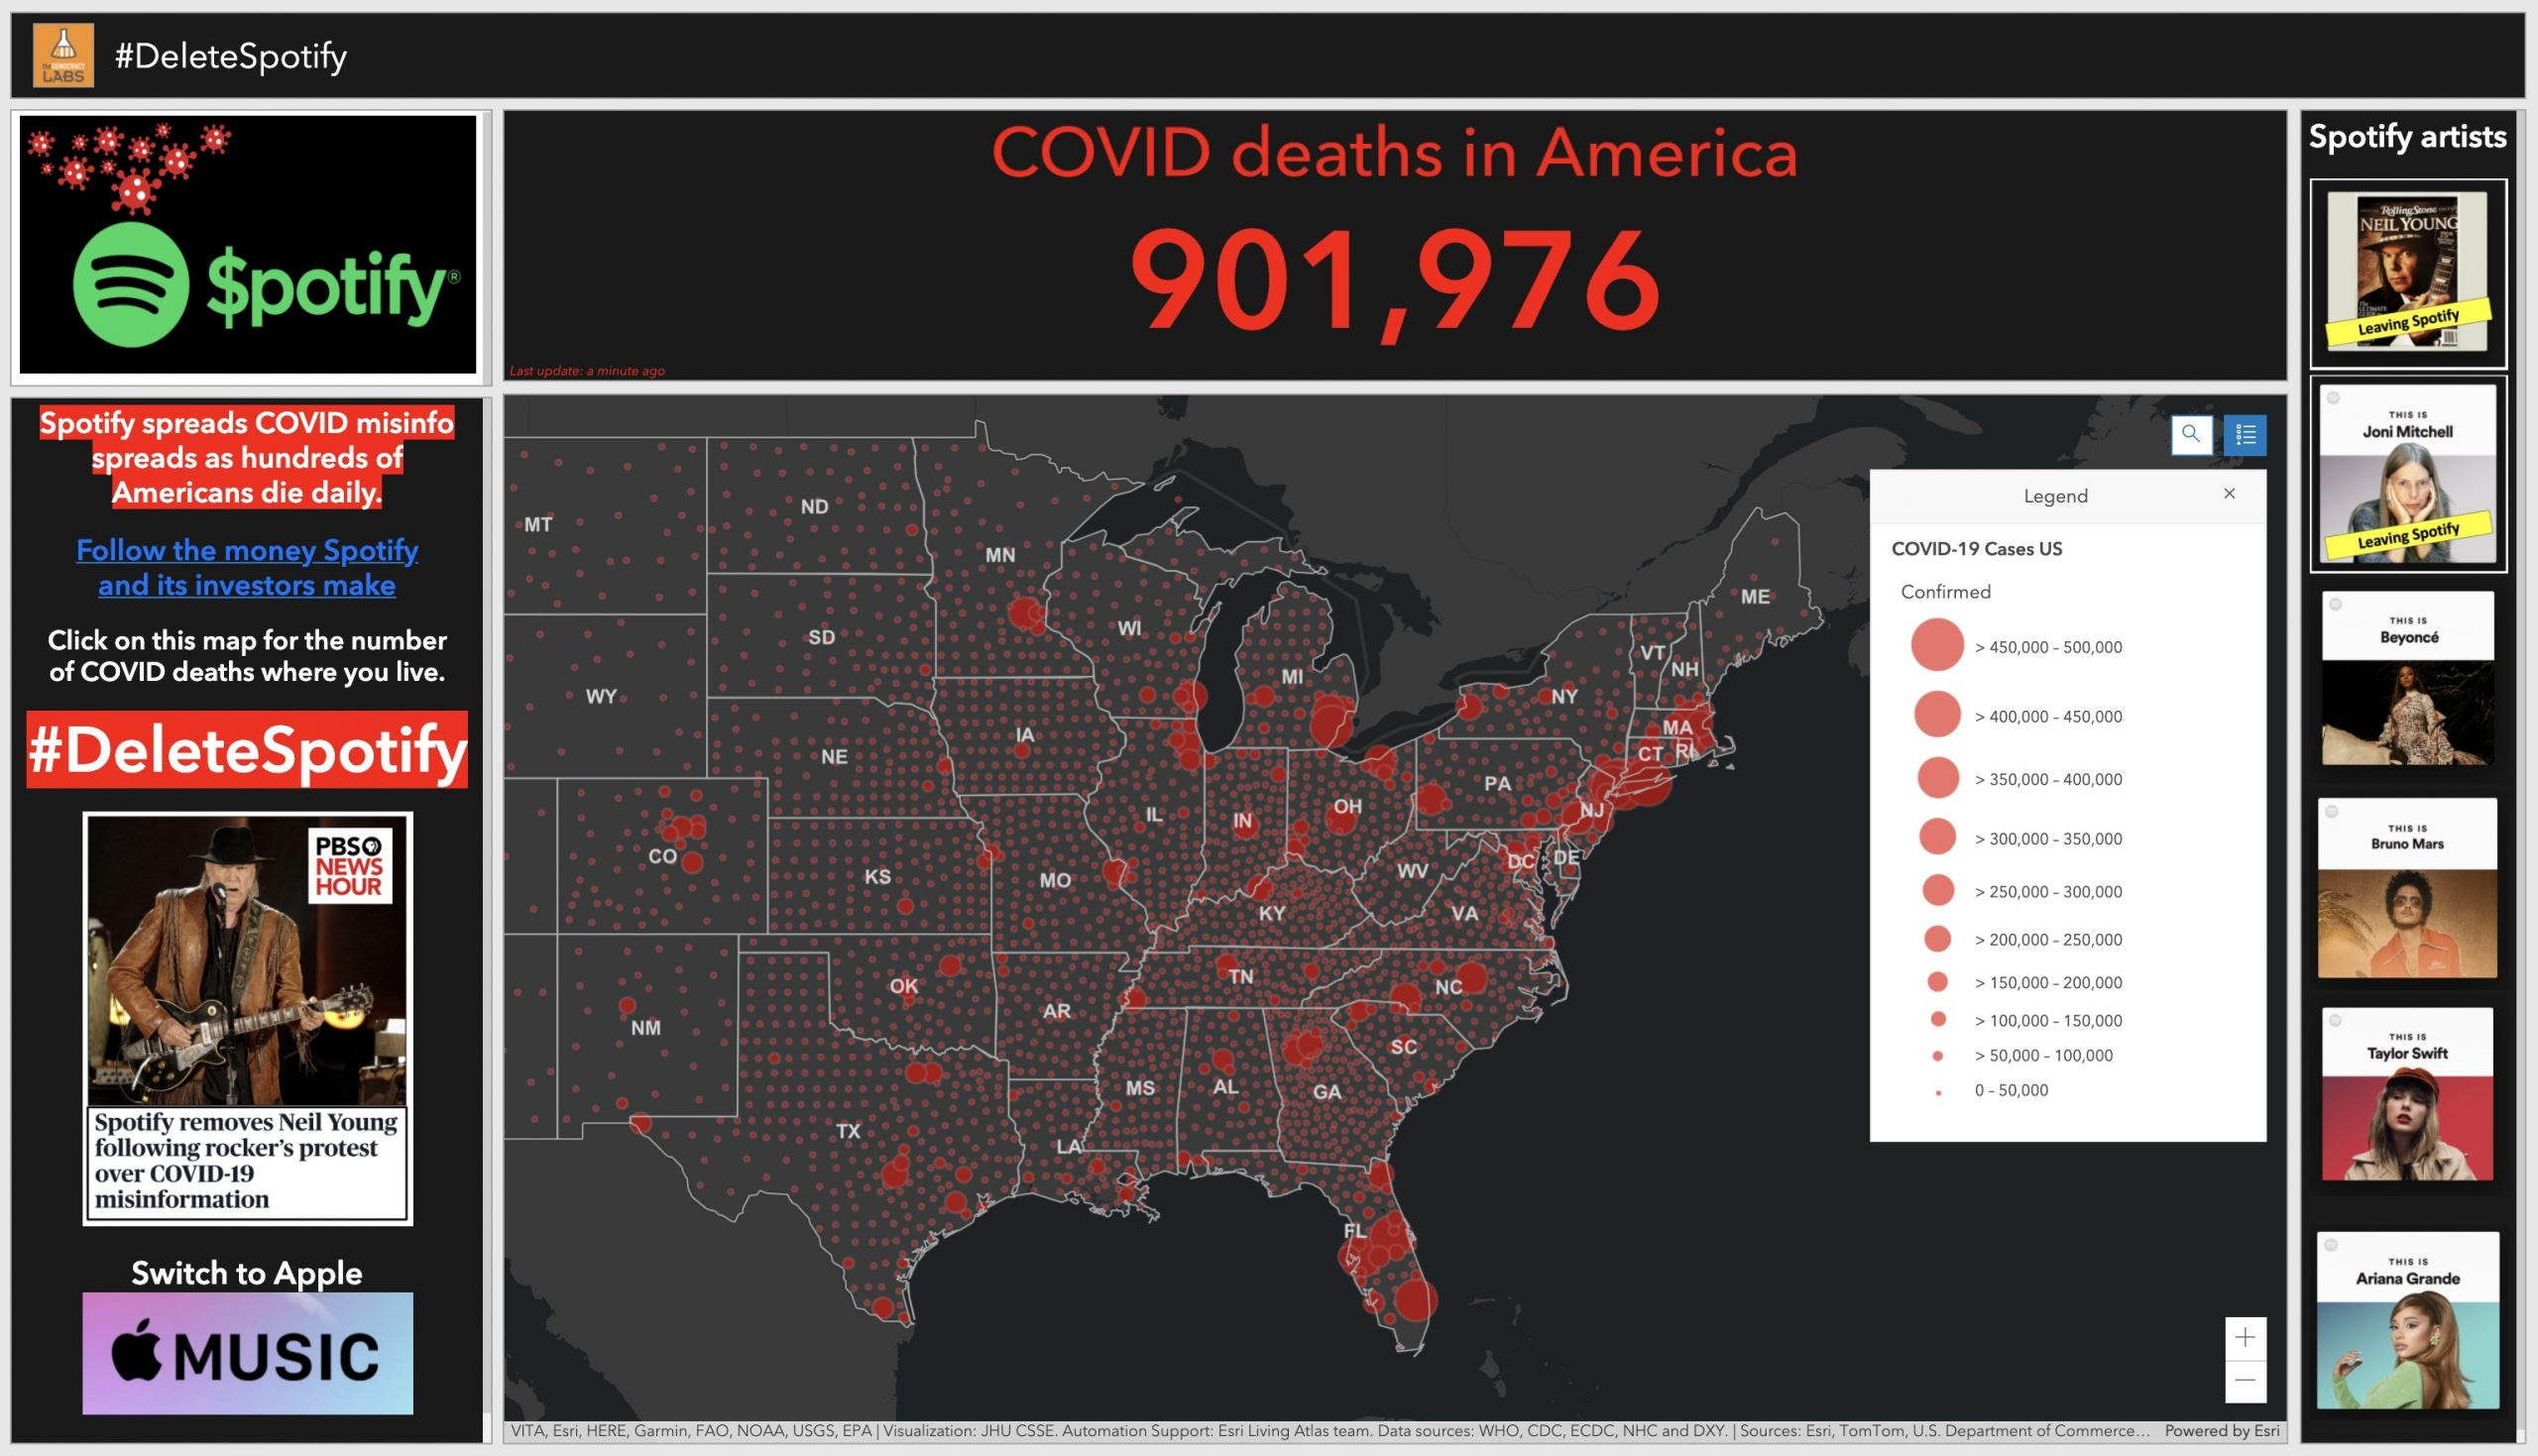 Real time dashboard of Covid deaths and Spotify content.